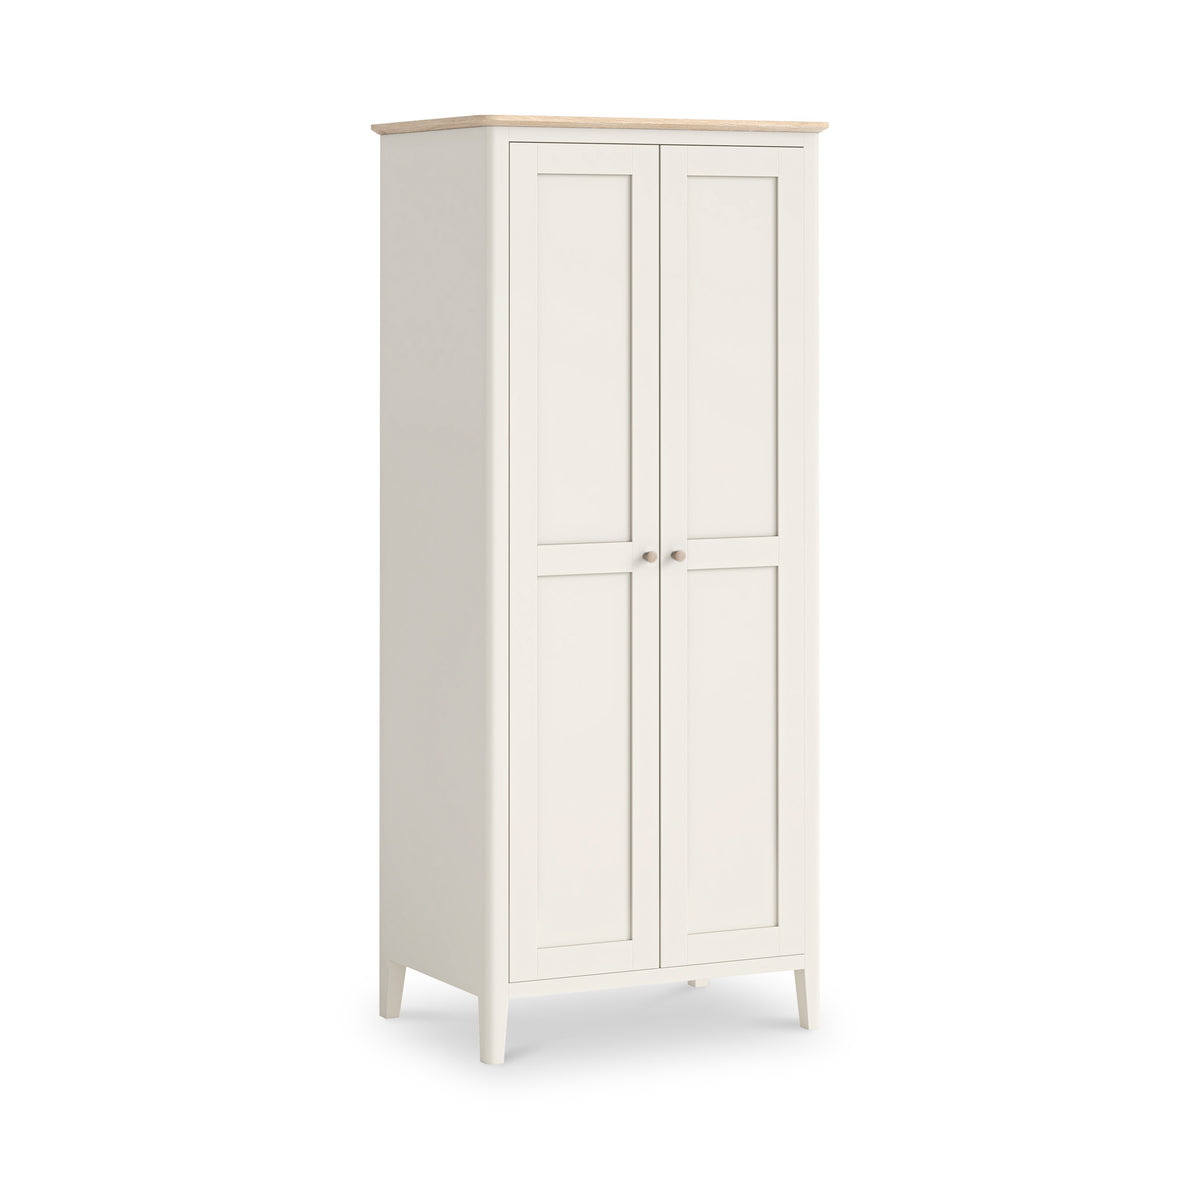 Penrose Coconut White Full Hanging Wardrobe with wooden handles from Roseland Furniture